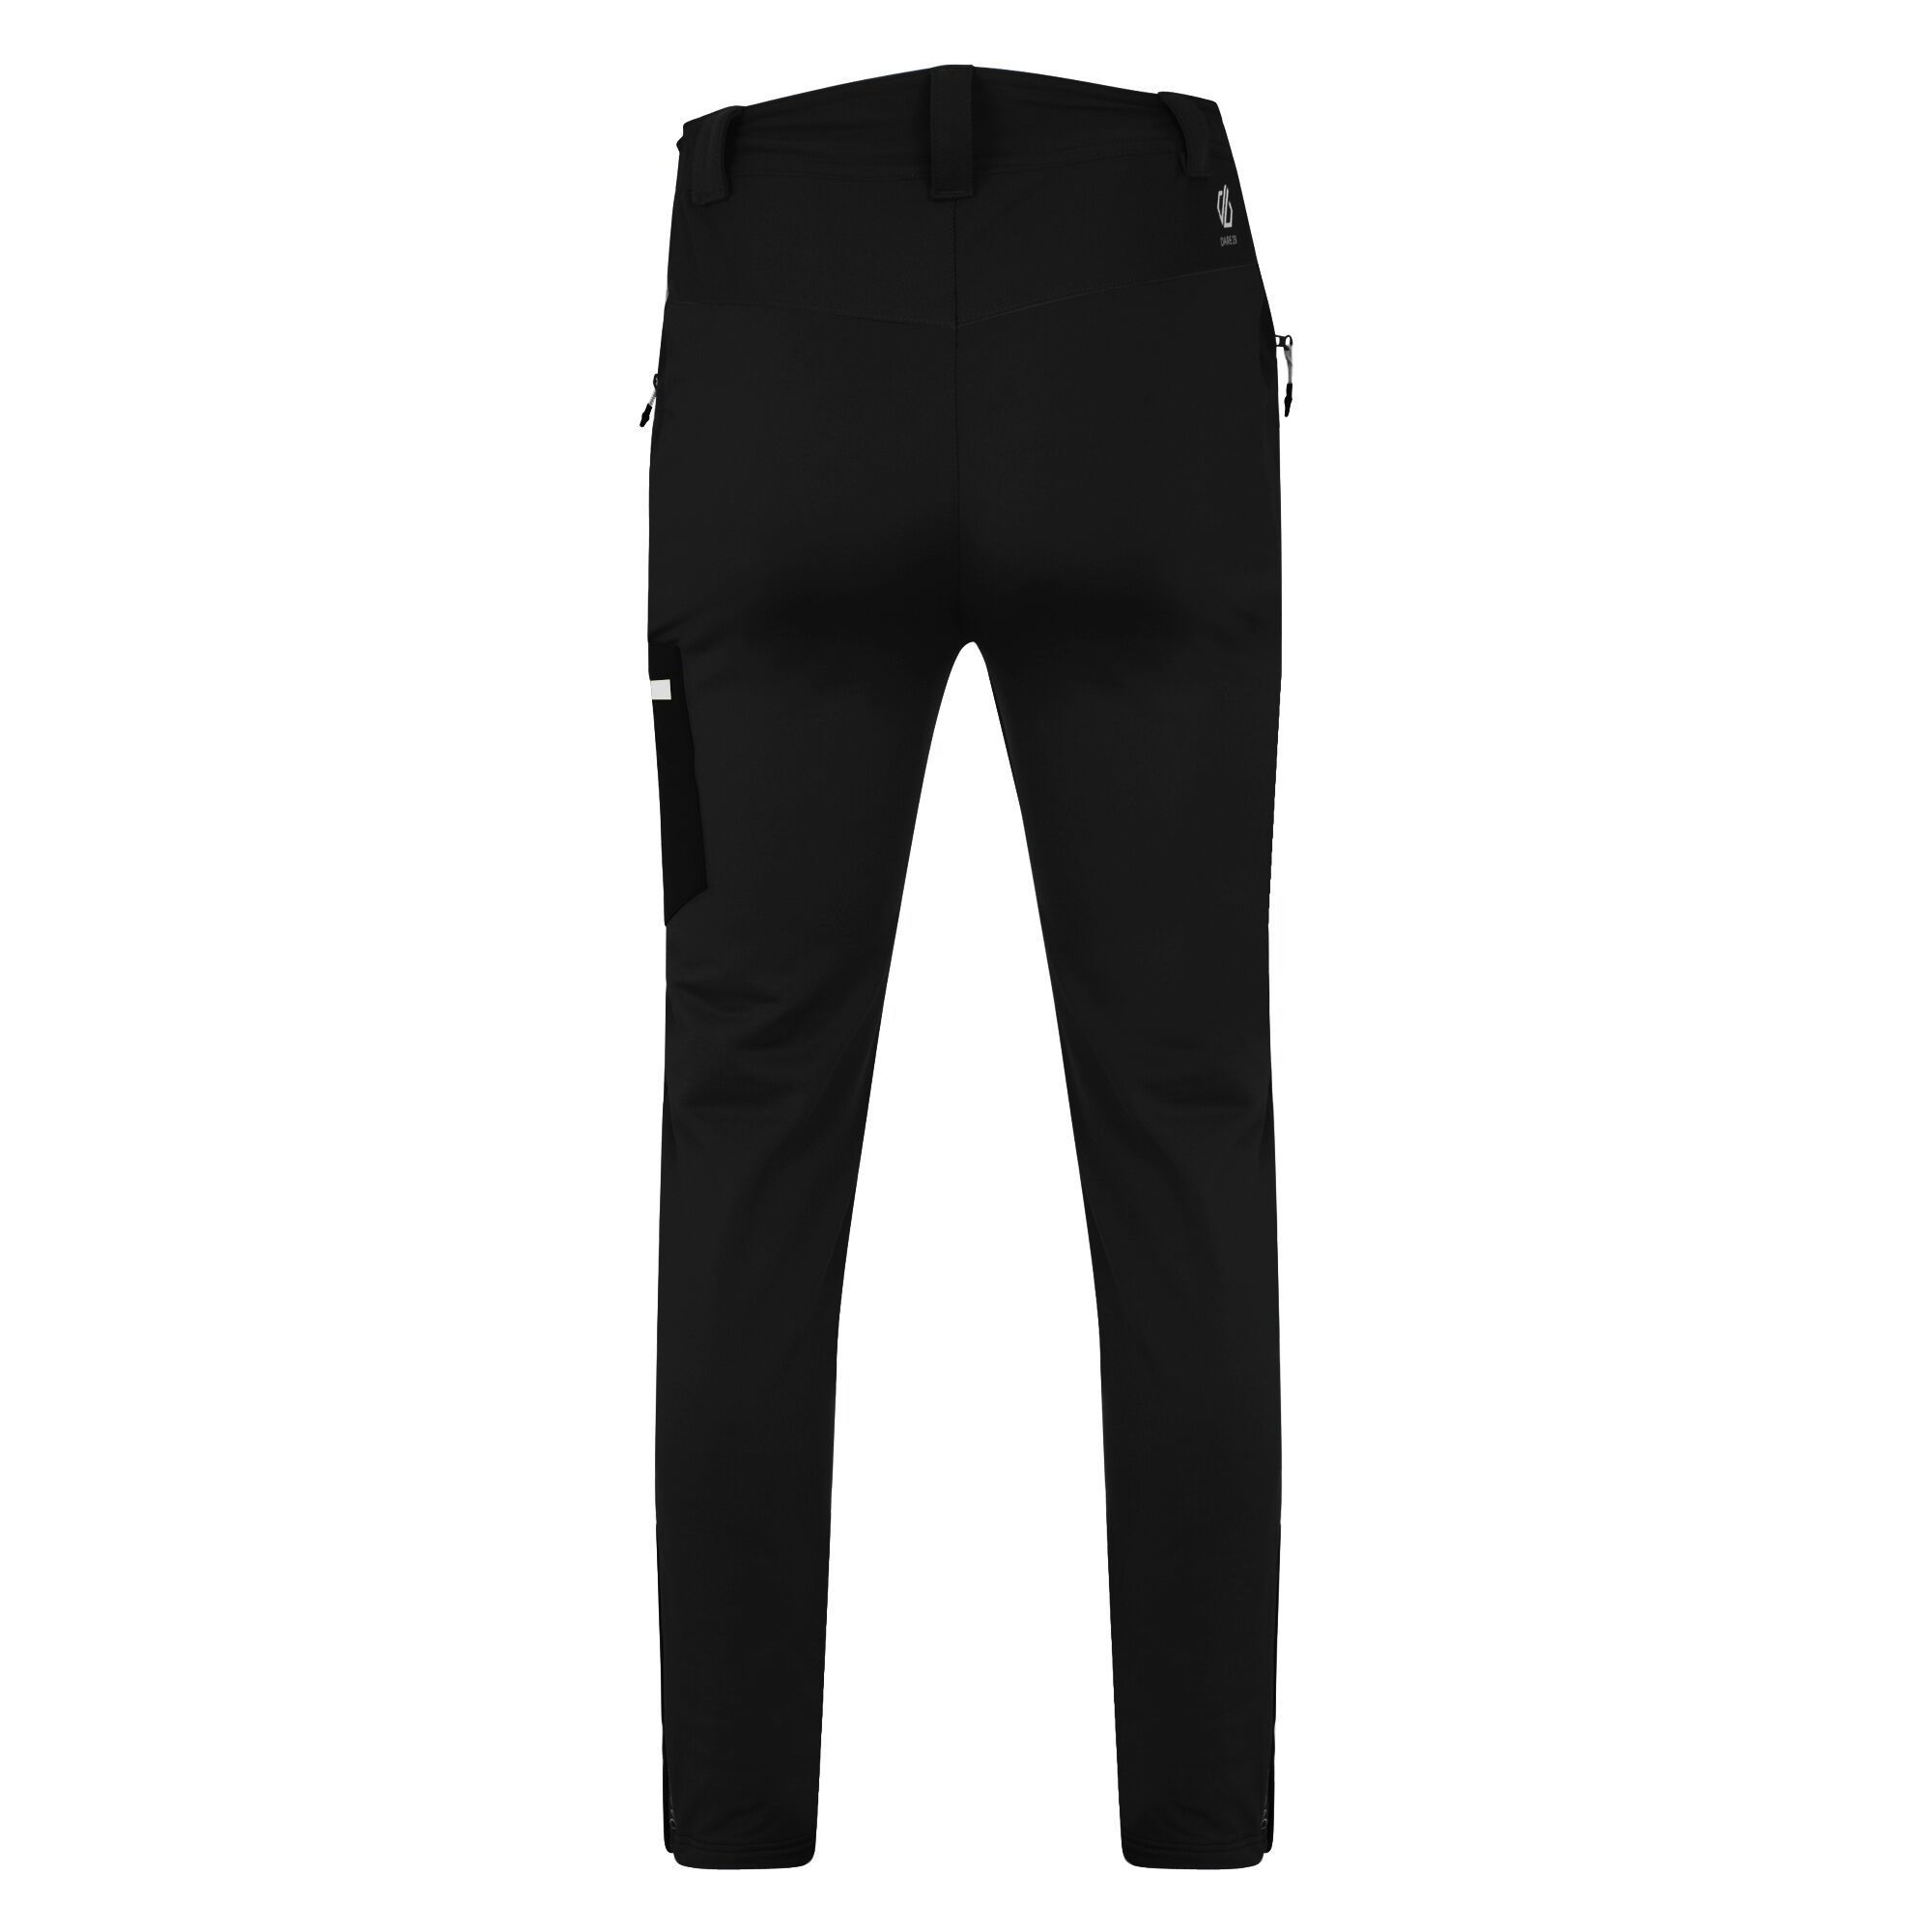 Material: 100% polyester. Ilus Hybrid Trouser with D-lab softshell to the front and core stretch to the back. Water repellent finish. Belt loops. Part elasticated waist. Zip fly opening. 2 x zipped side pockets. 1 x zipped patch pocket. Articulated knee design. Reinforced self fabric overlay at knees. Zipped hem closure.